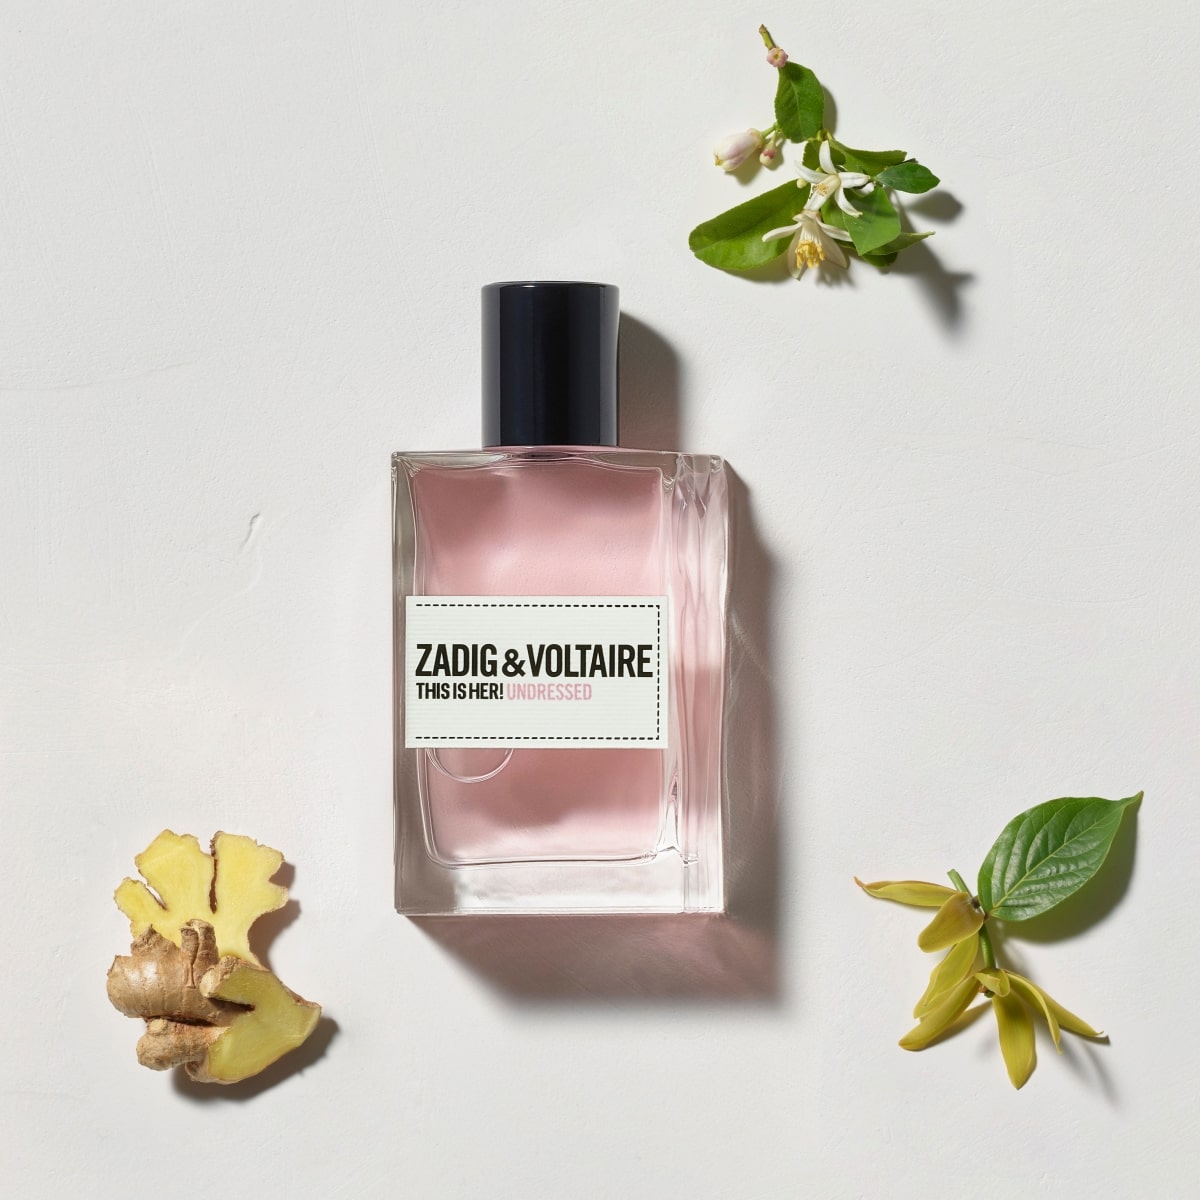 This is Her! Undressed Zadig&Voltaire - Incenza